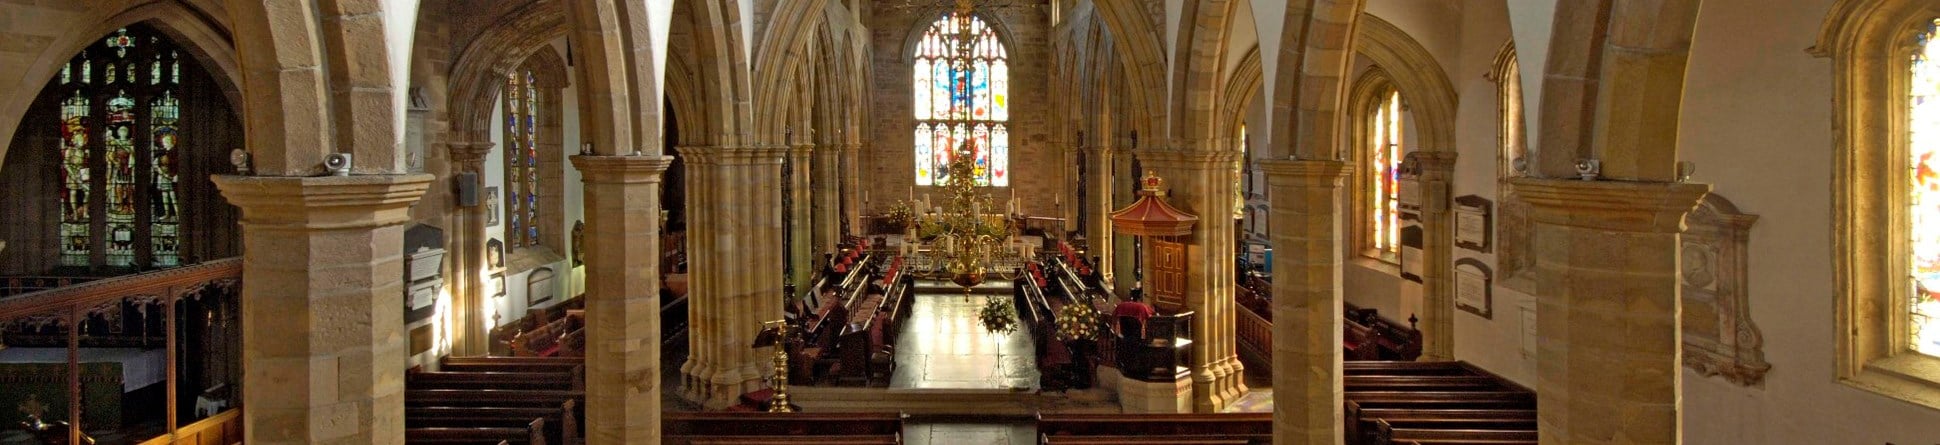 Interior of priory church, Lancaster, Lancashire showing arches of the 14th century aisle arcades